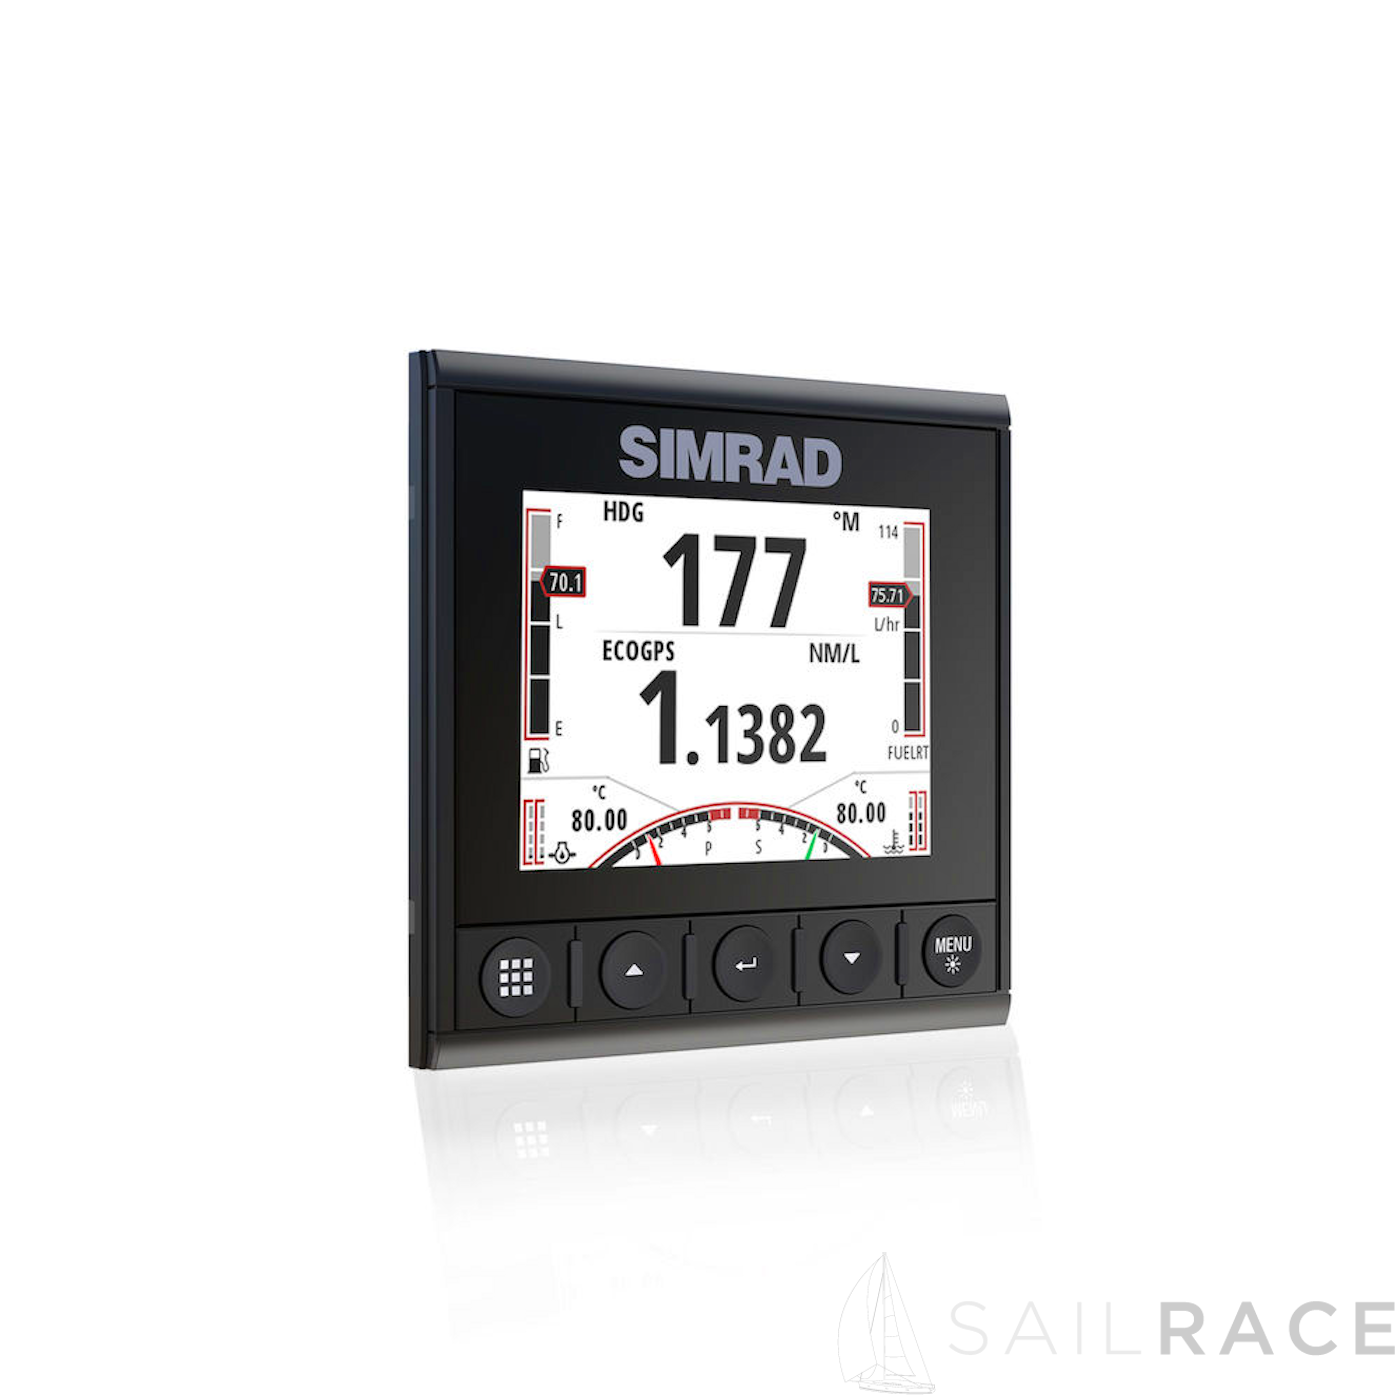 Simrad Is42j is a 4.1-inch Colour Display That Offers a Clear View of Engine Status and Performance for Up to  J1939 Diesel Engines - image 3